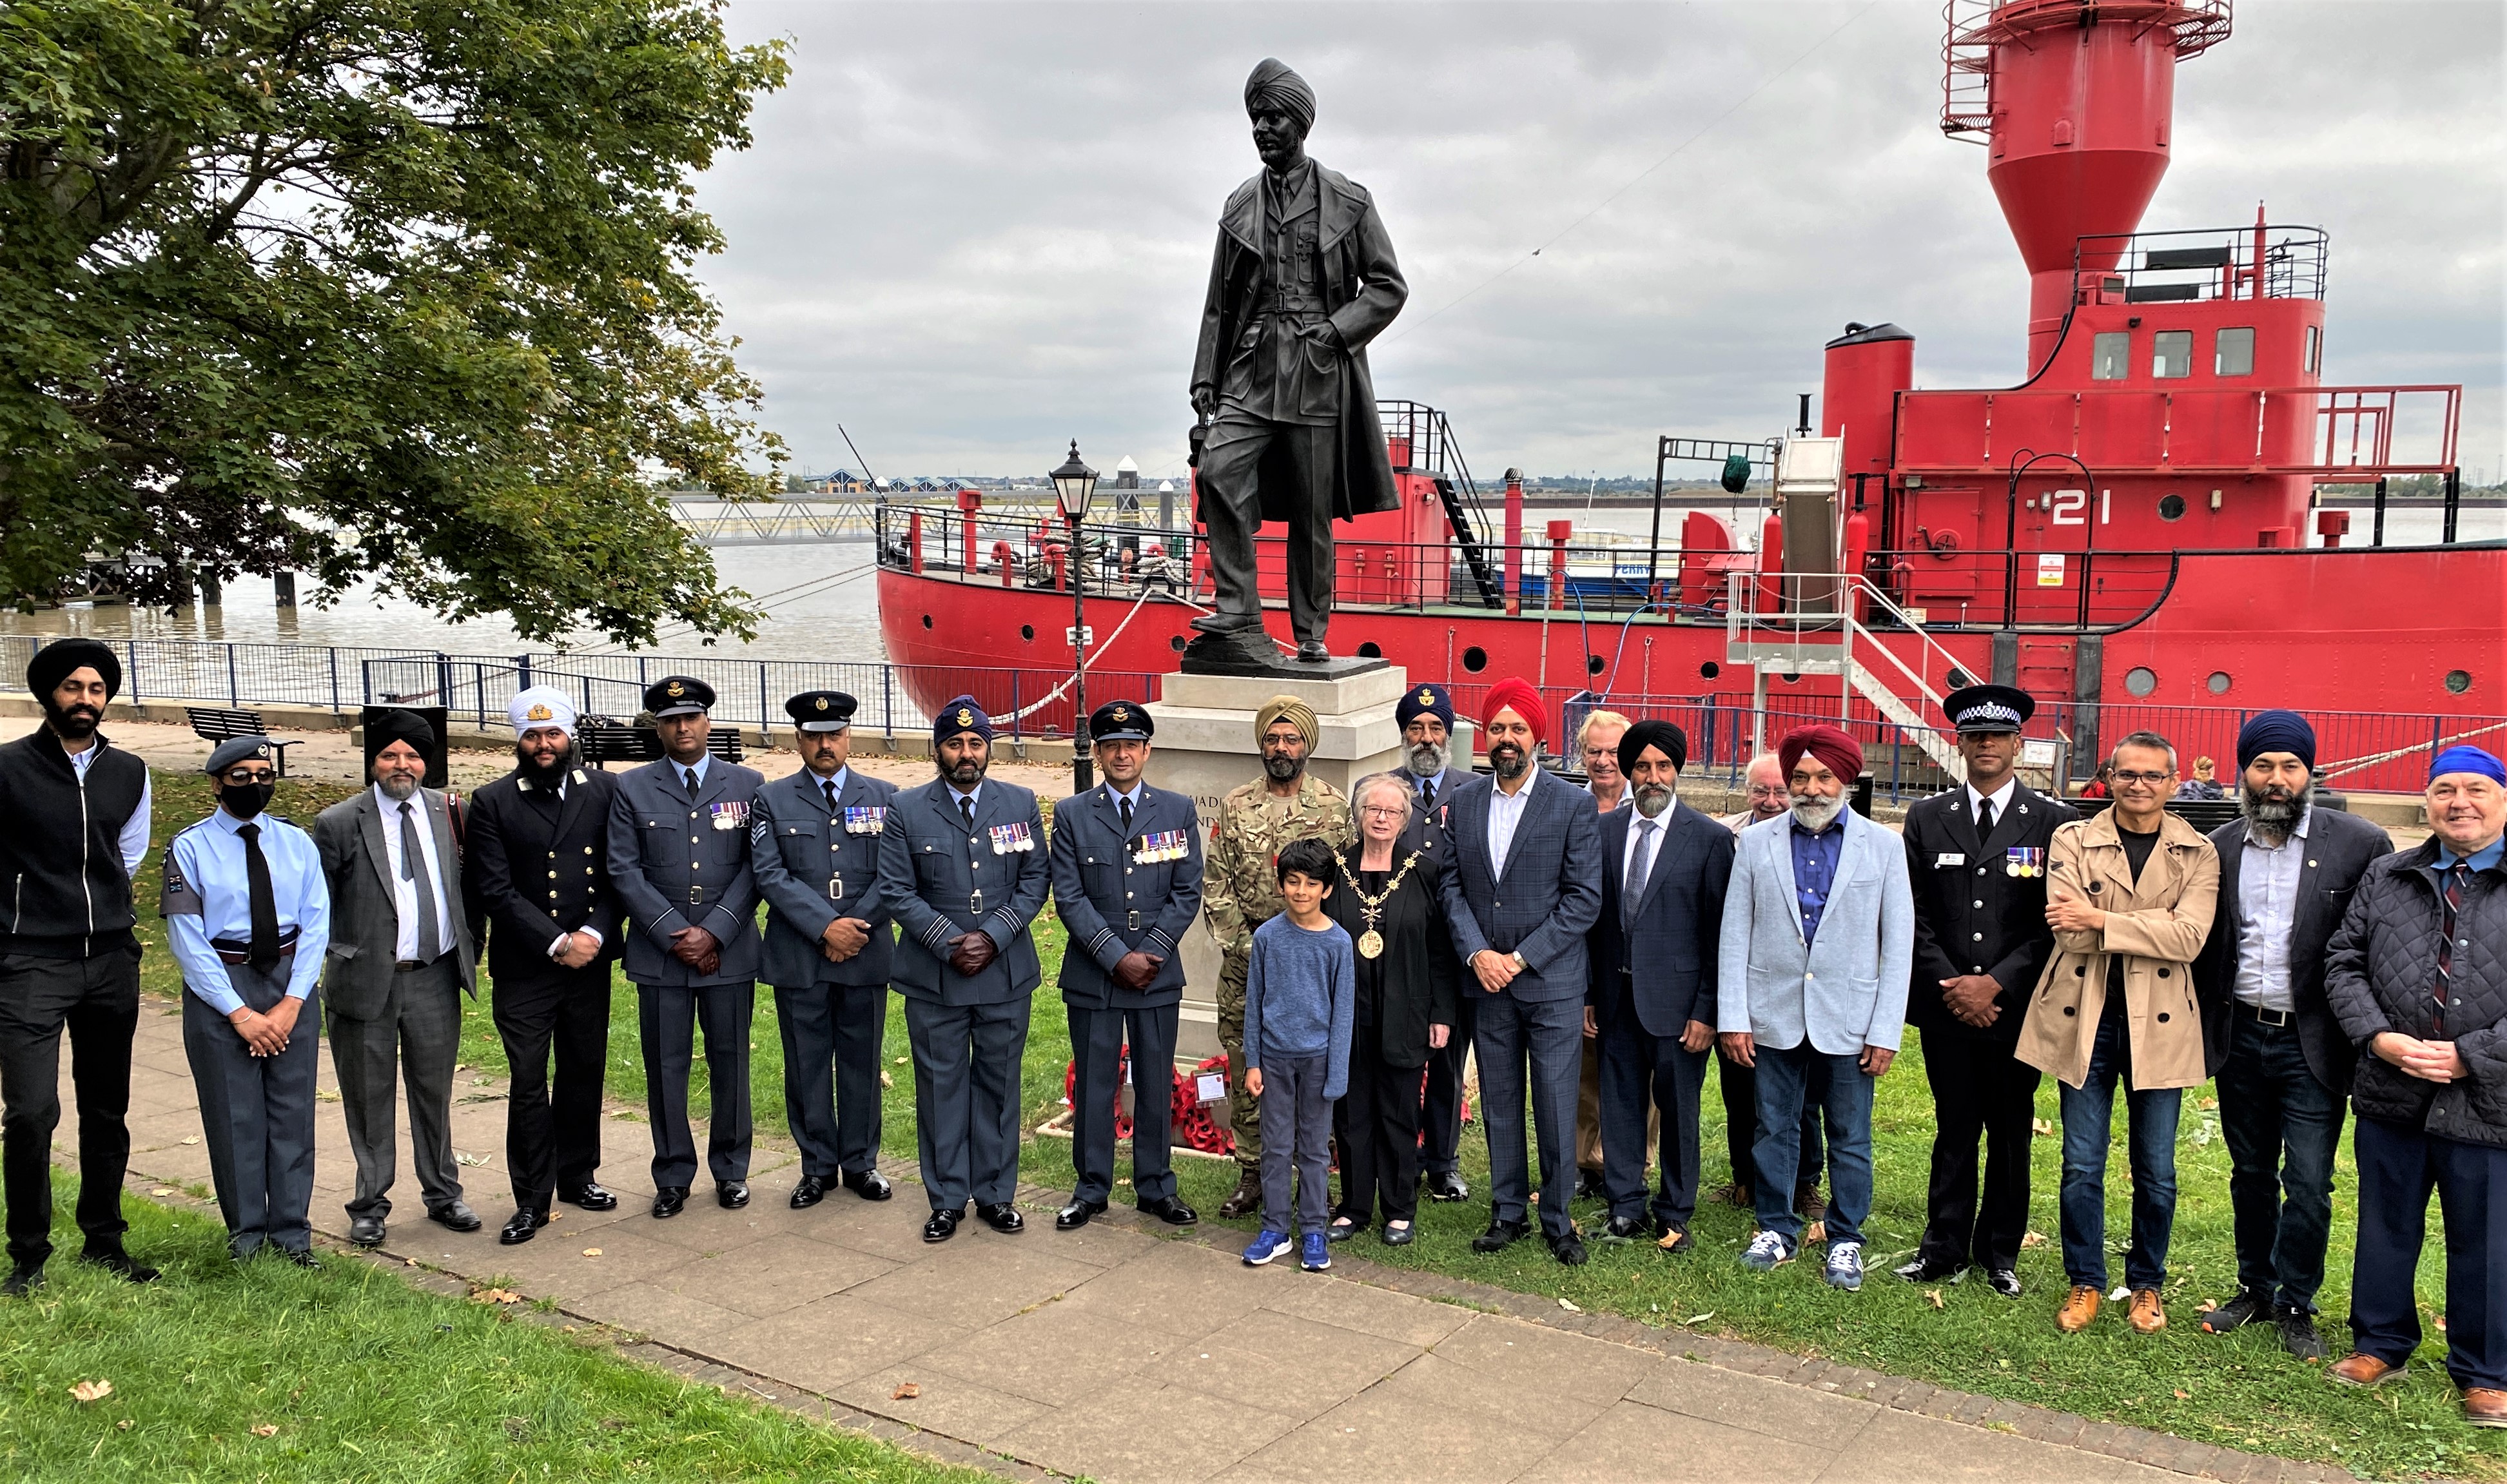 Personnel and family gather next to statue, with boat on the river in the background.